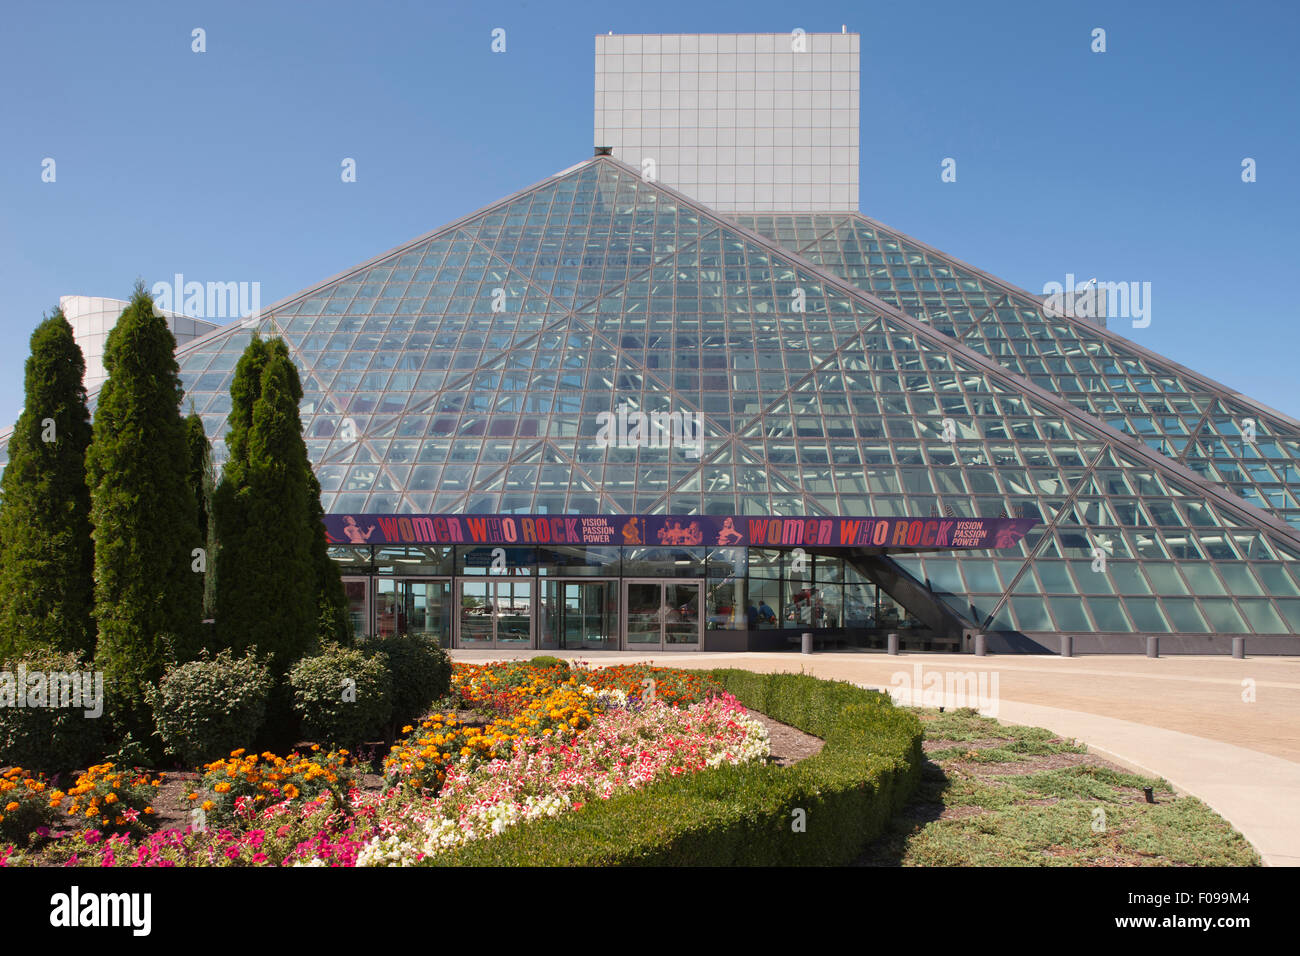 ROCK AND ROLL HALL OF FAME (©I M PEI 1995) WATERFRONT DOWNTOWN CLEVELAND OHIO USA Stock Photo